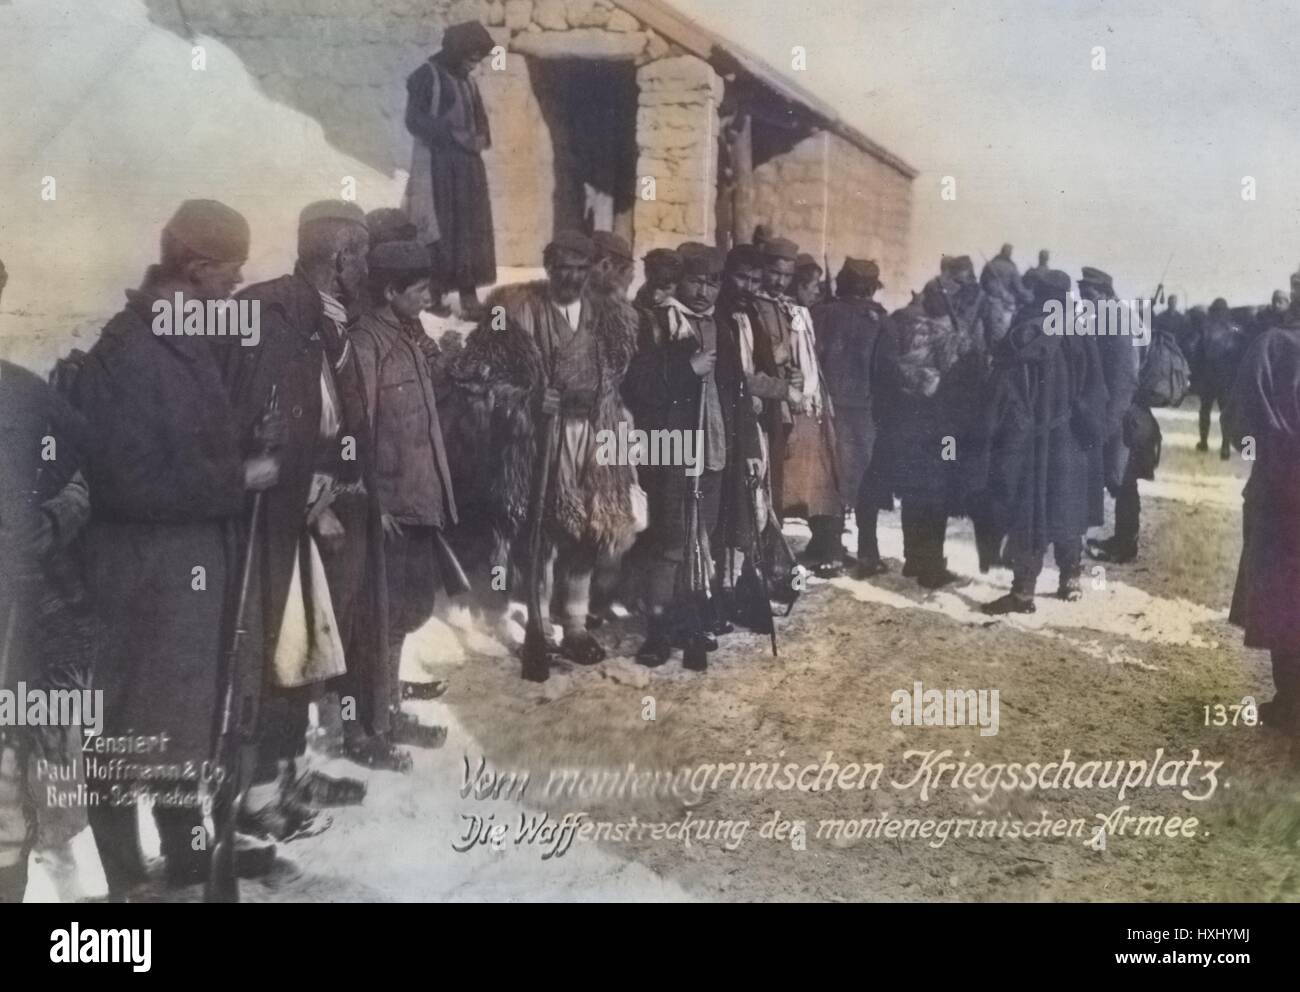 German World War I photographic postcard depicting a memorial in Montenegro, 1915. From the New York Public Library. Note: Image has been digitally colorized using a modern process. Colors may not be period-accurate. Stock Photo